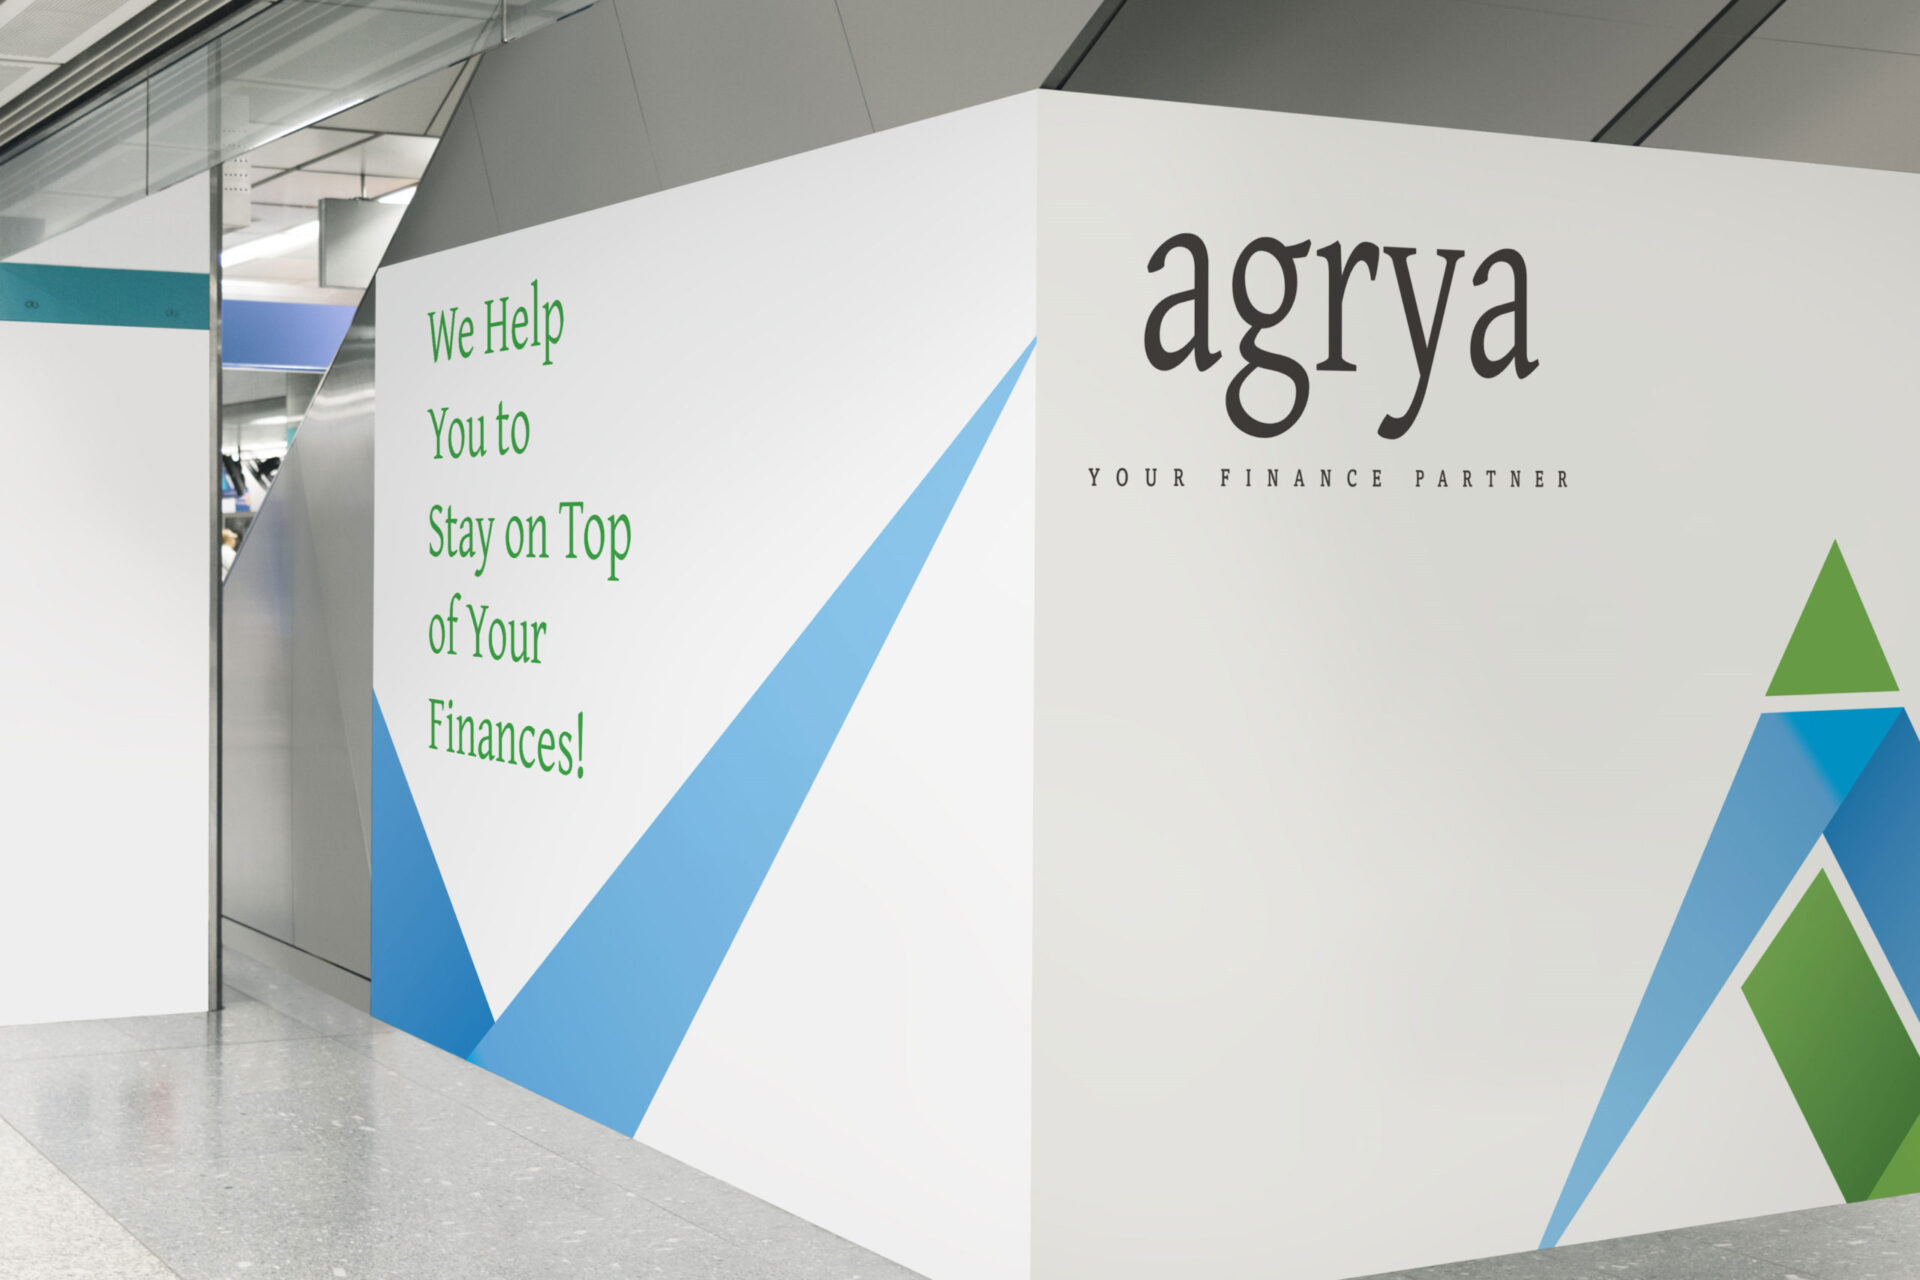 outdoor-advertising-signs-brand-identity-design-interiors-finance-consulting-agrya